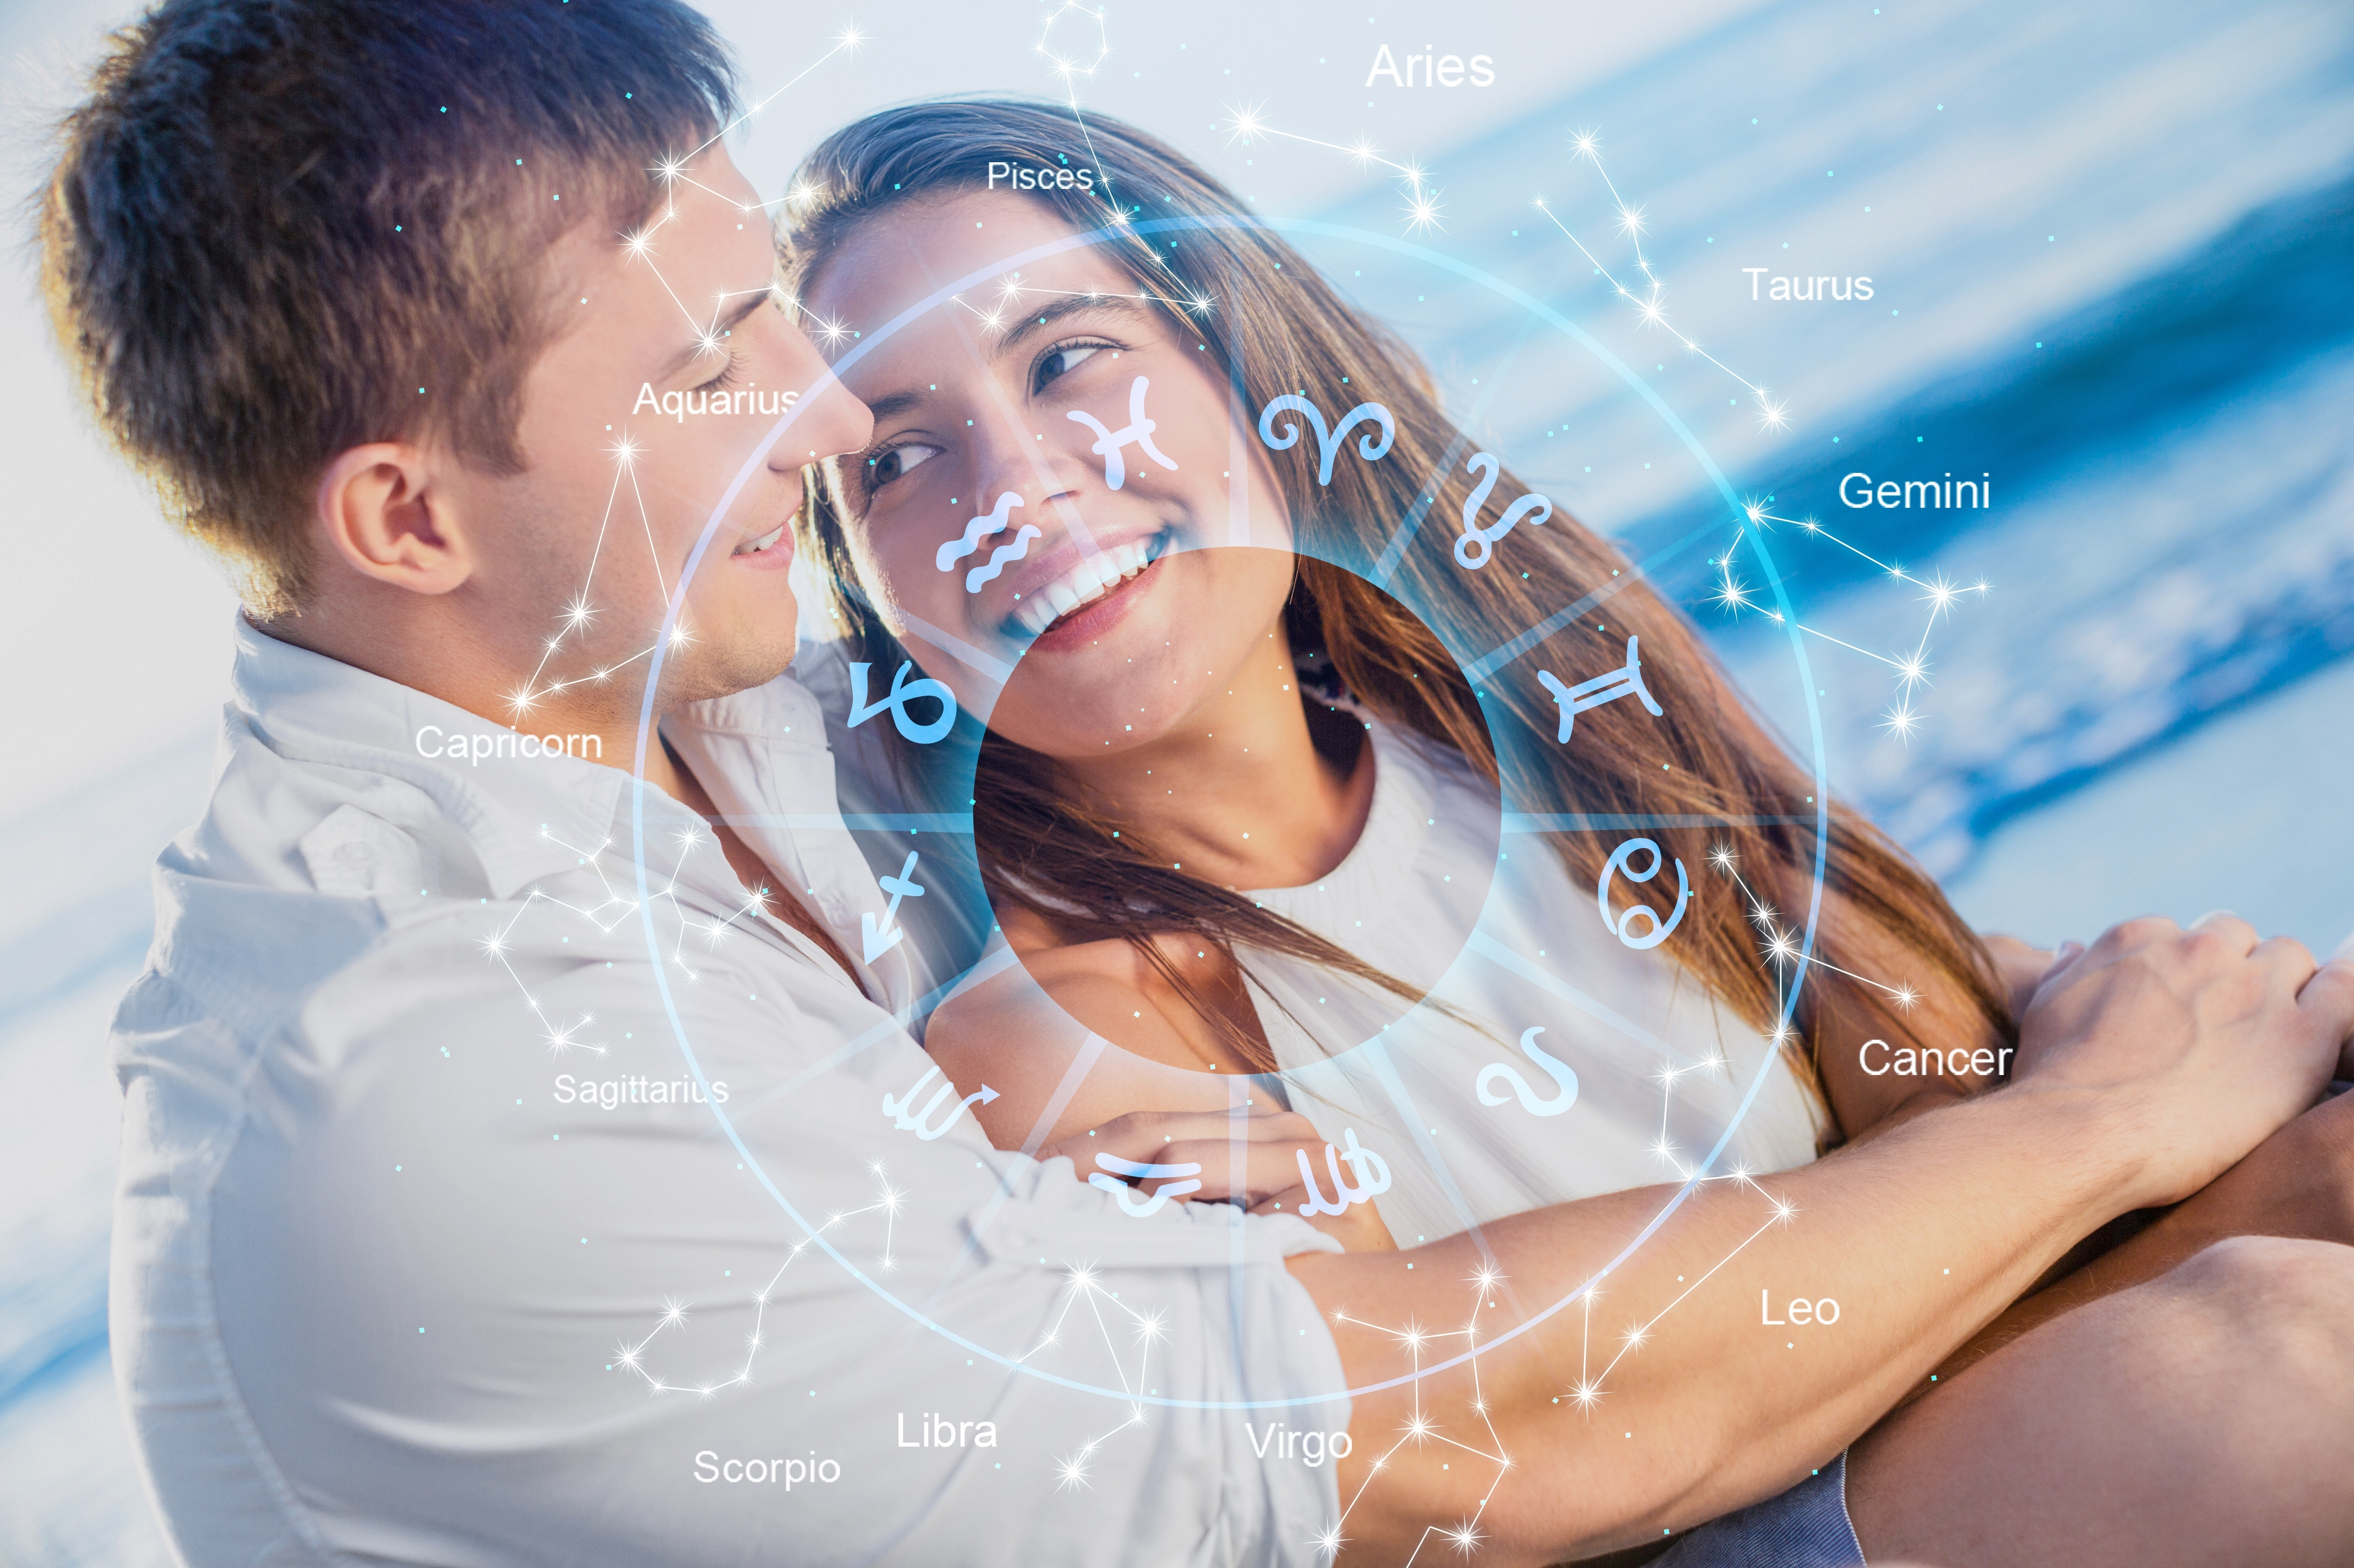 A photo of a couple surrounded by the Zodiac sign | Source: Shutterstock